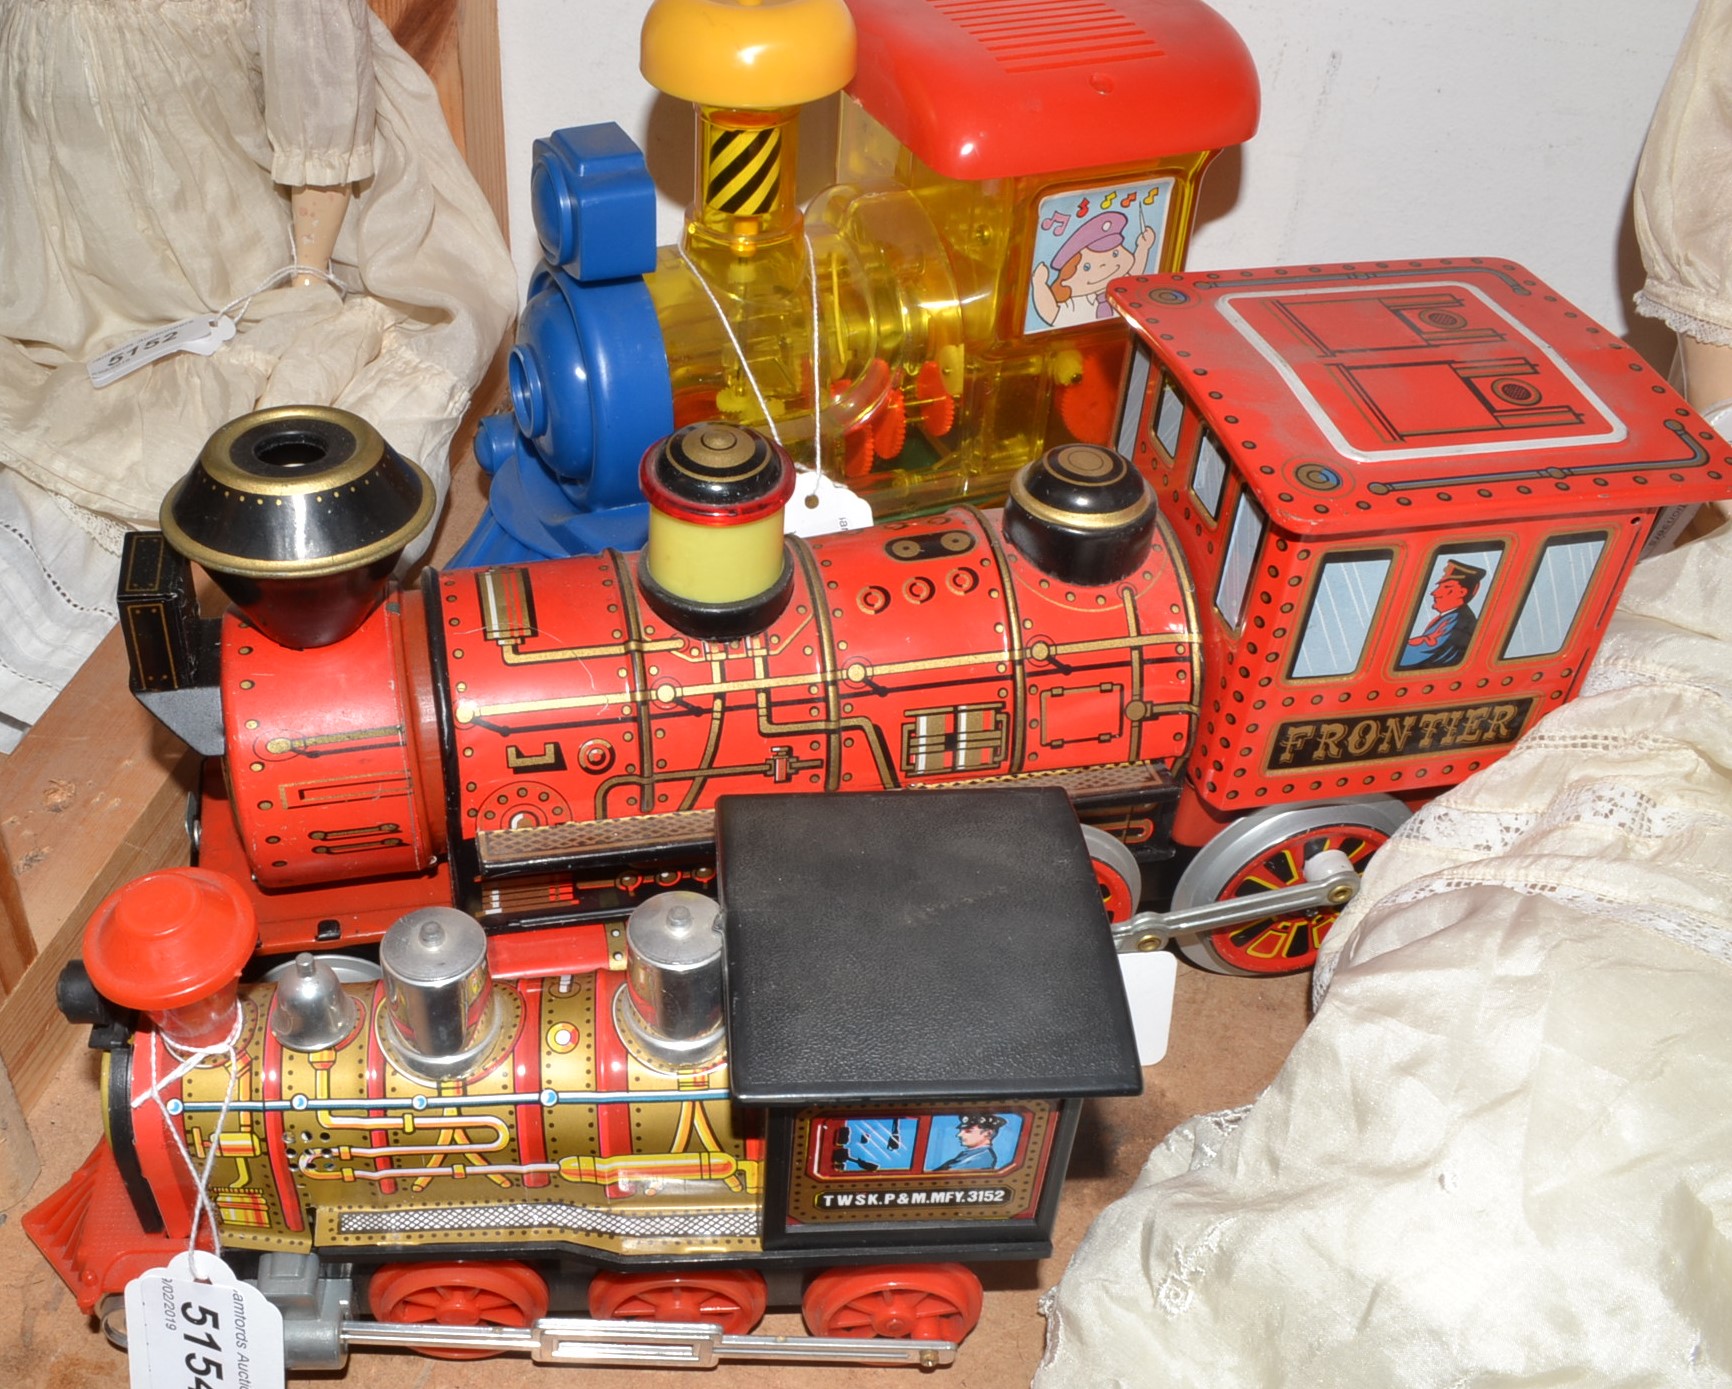 A Japanese Modern Toys Tin plate battery operated Frontier Train, red and black body,